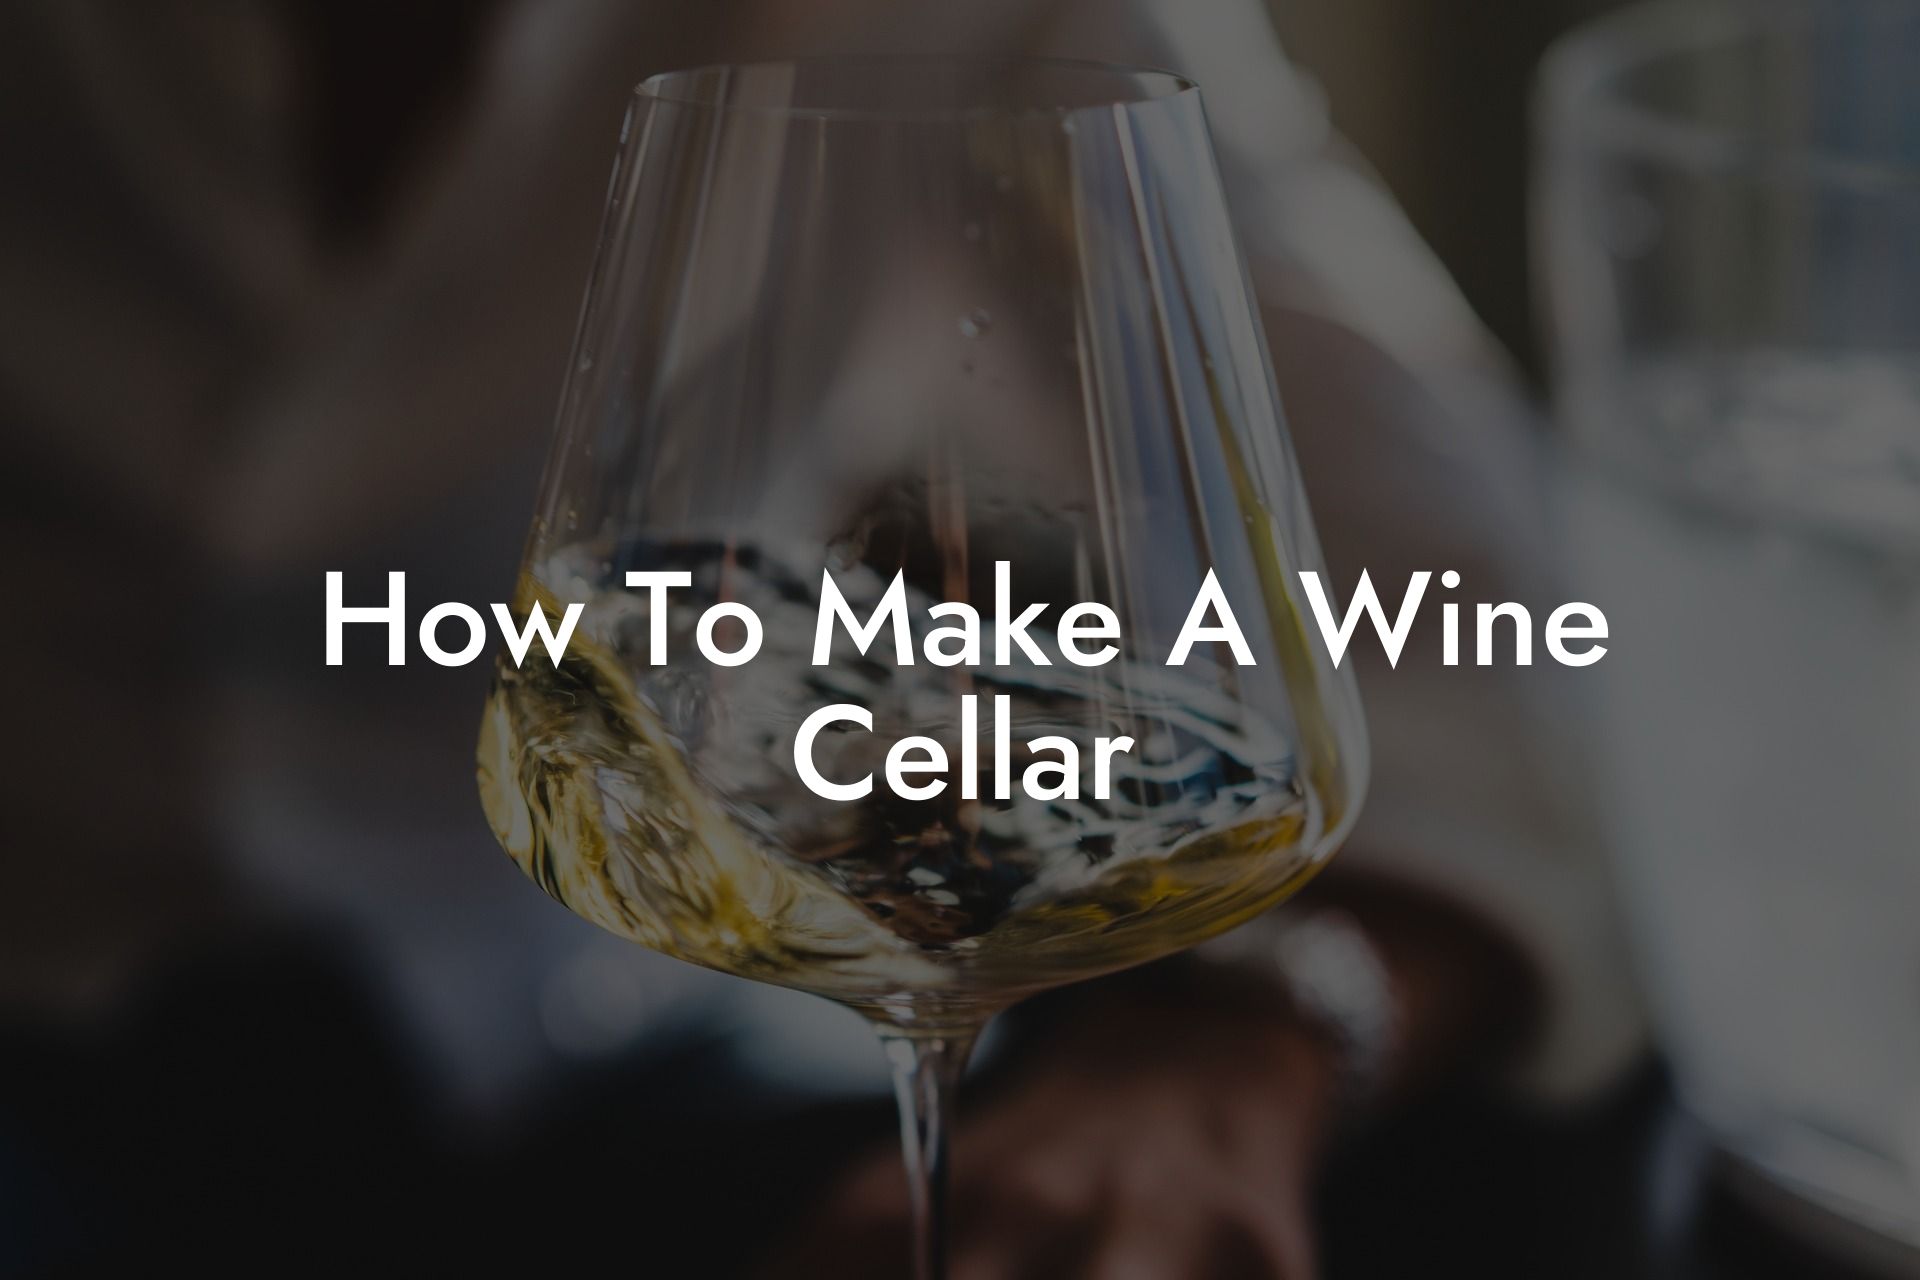 How To Make A Wine Cellar